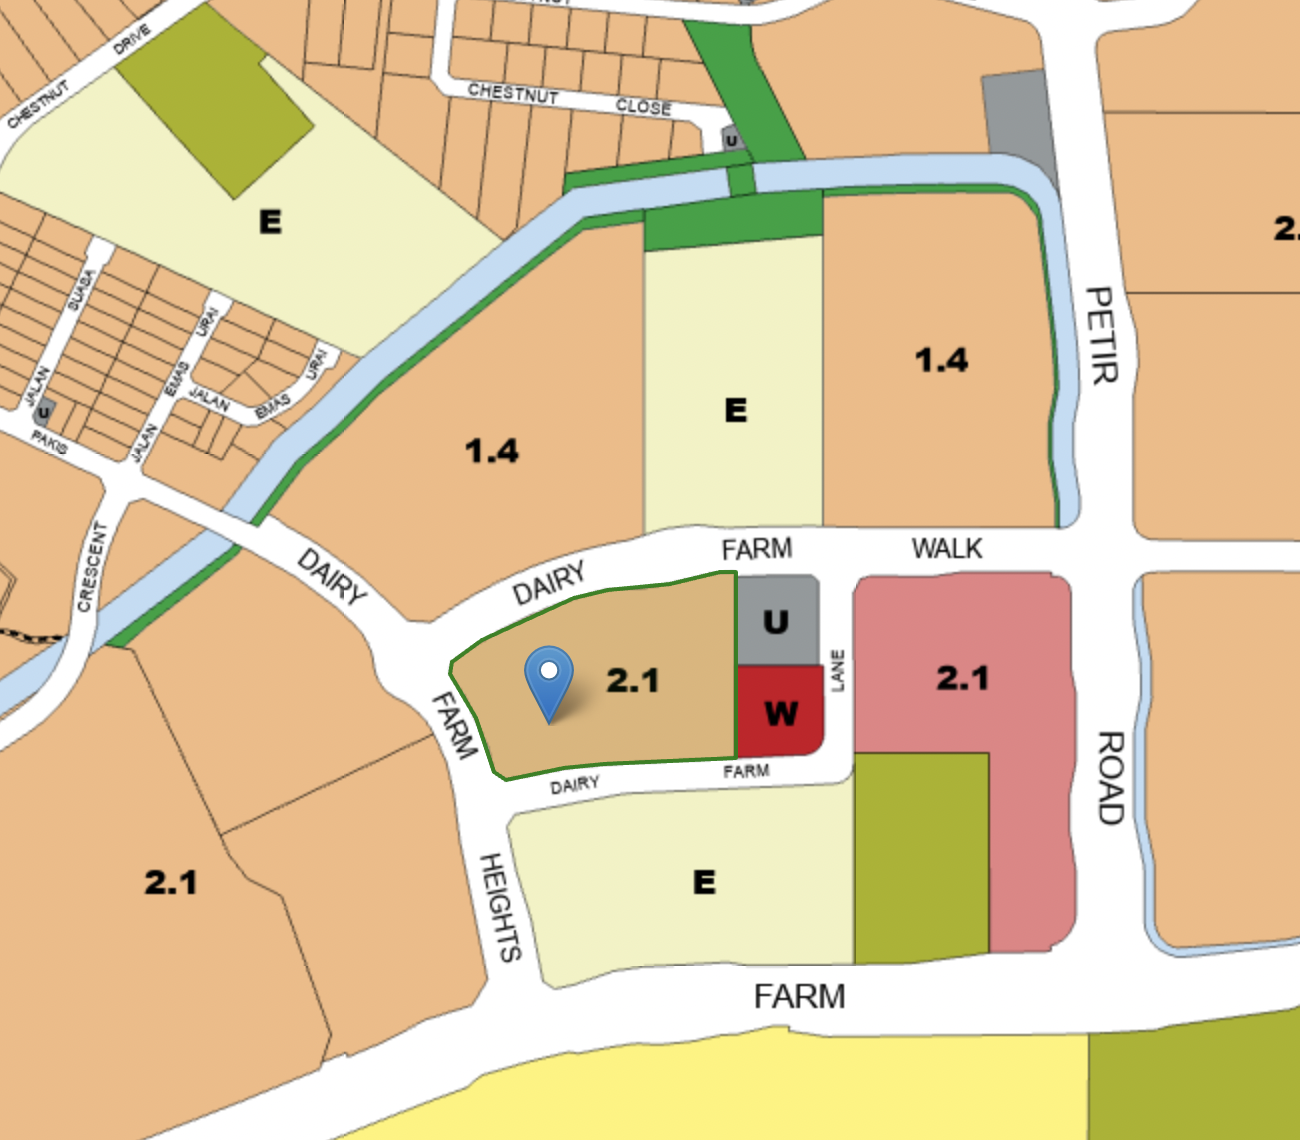 Future Plans for Surrounding Plots of Land Nearby